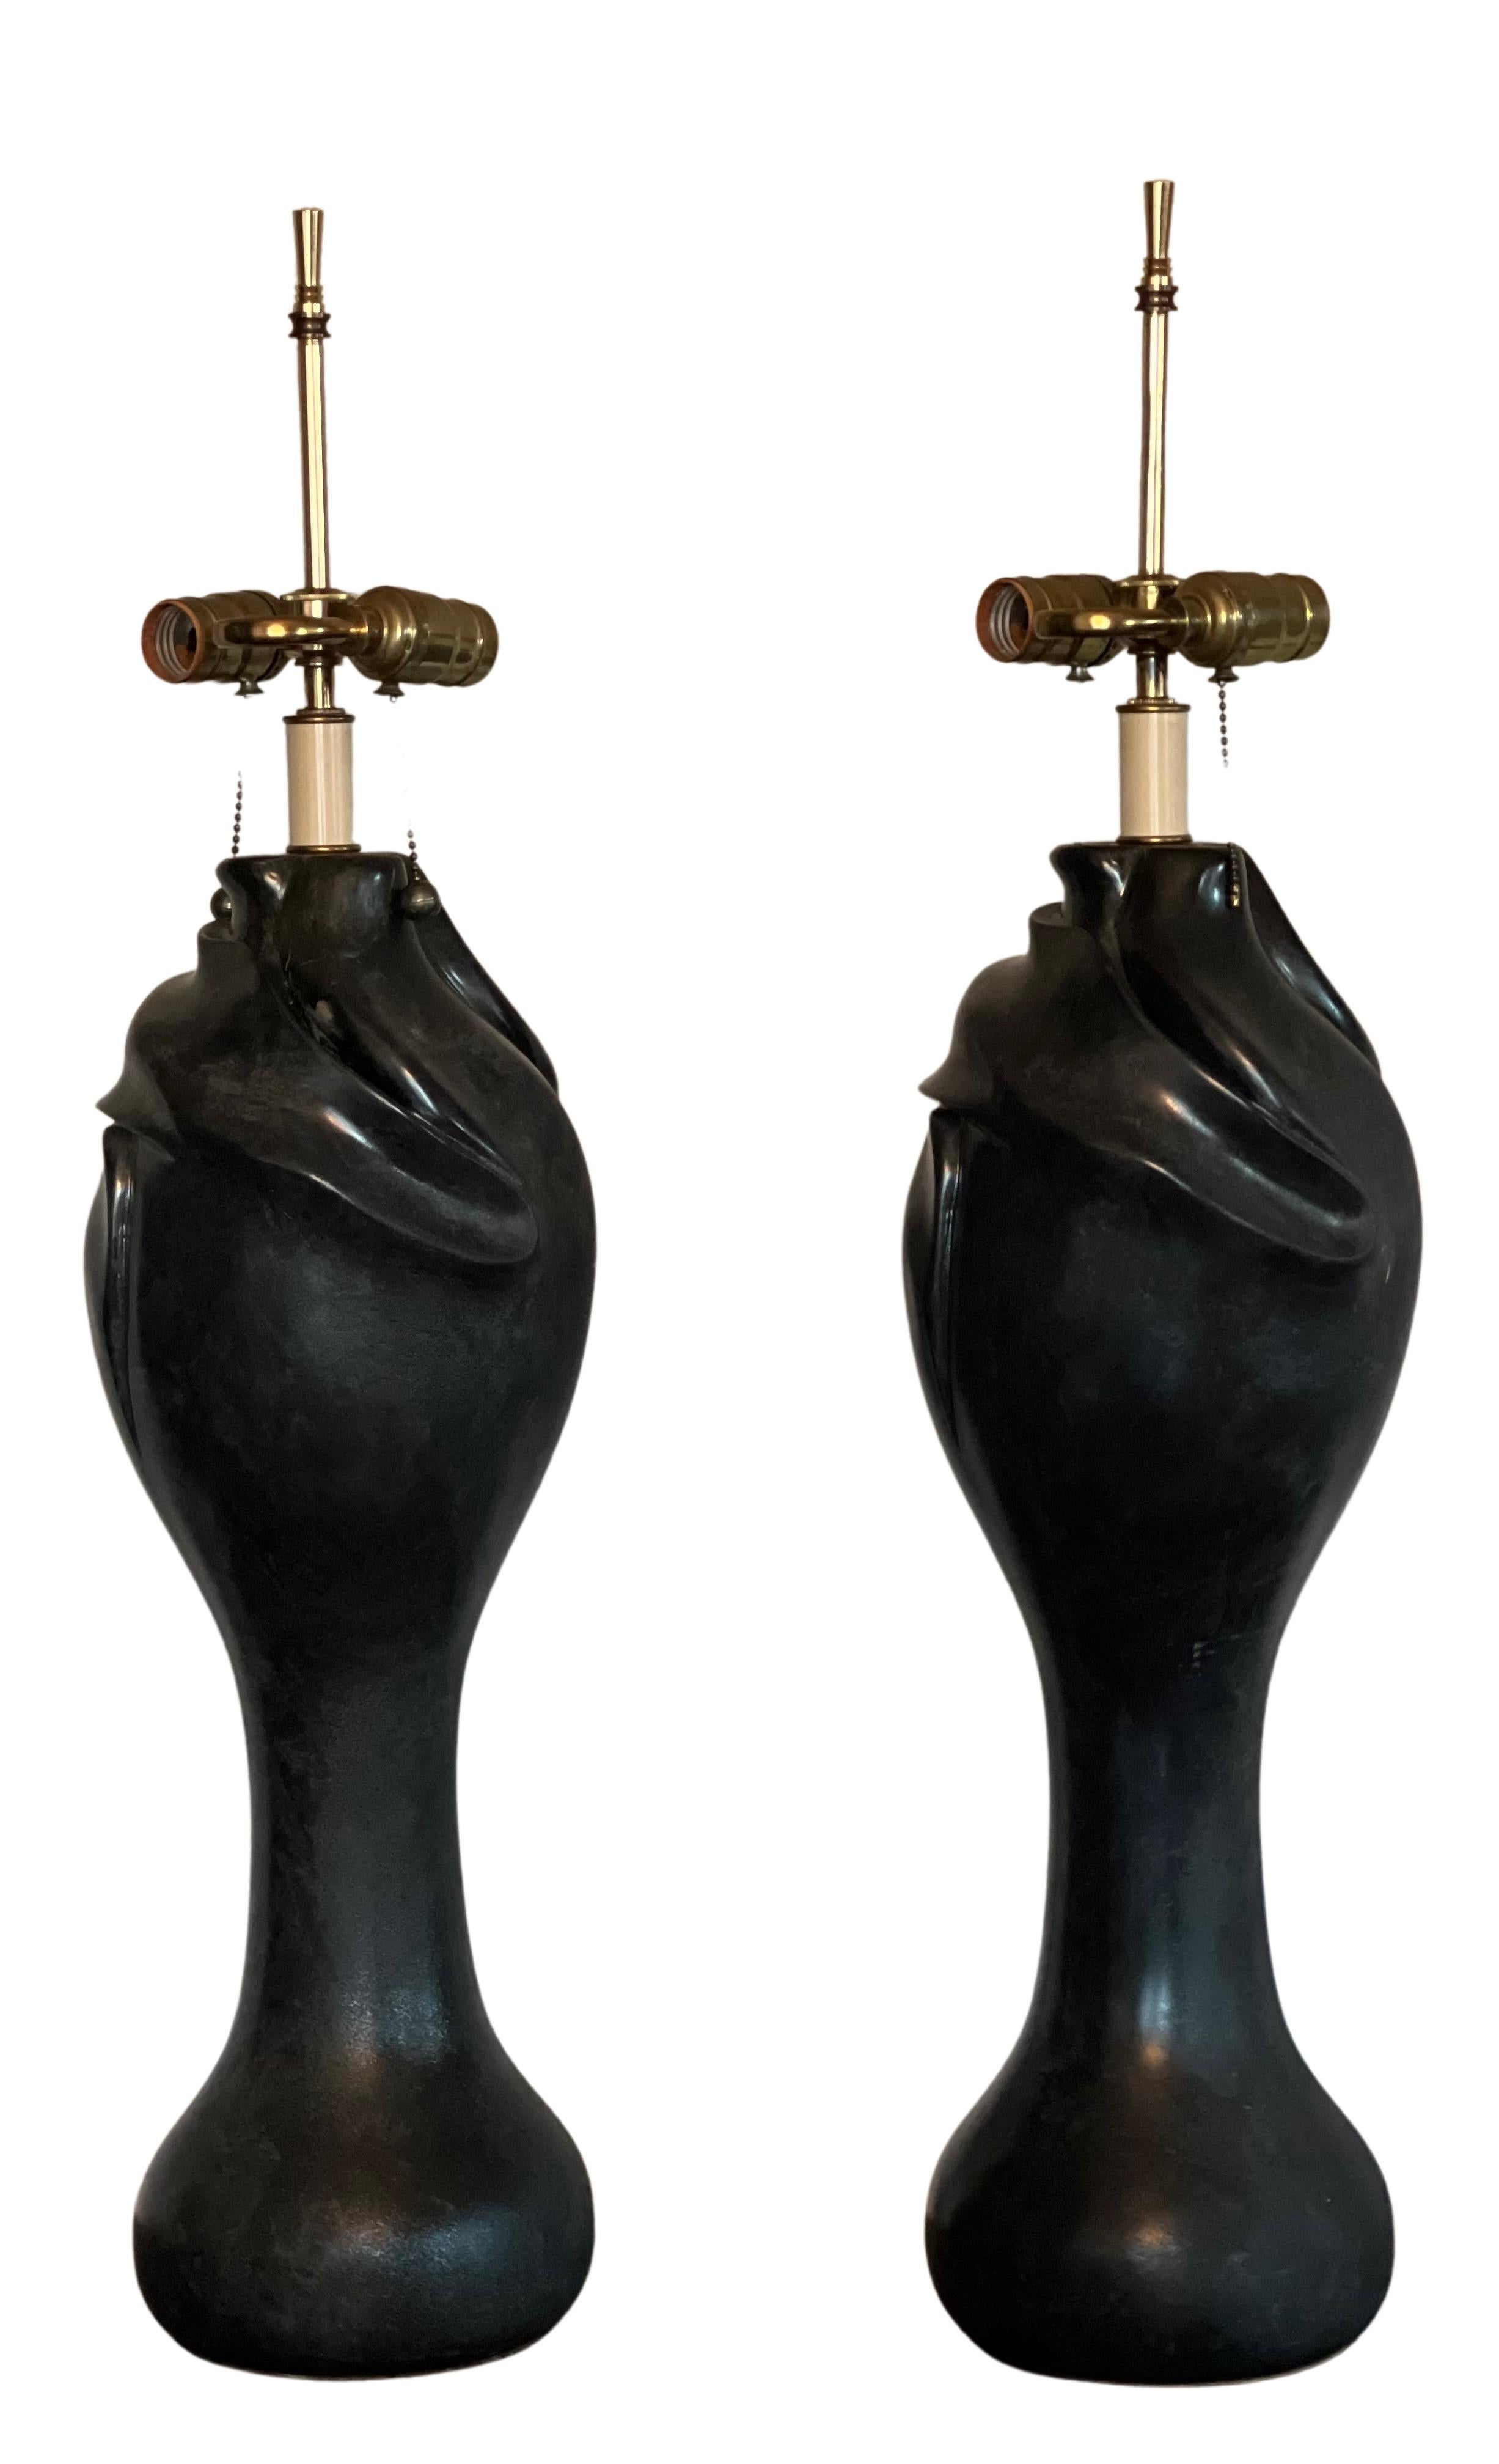 Elegant mid-century Jugenstil style free-form black faux stone table lamps.

The pair has a flowing, foliate organic form found in many of the original Art Nouveau and Jugenstil pieces from the late 19th to early 20th centuries. They are crafted